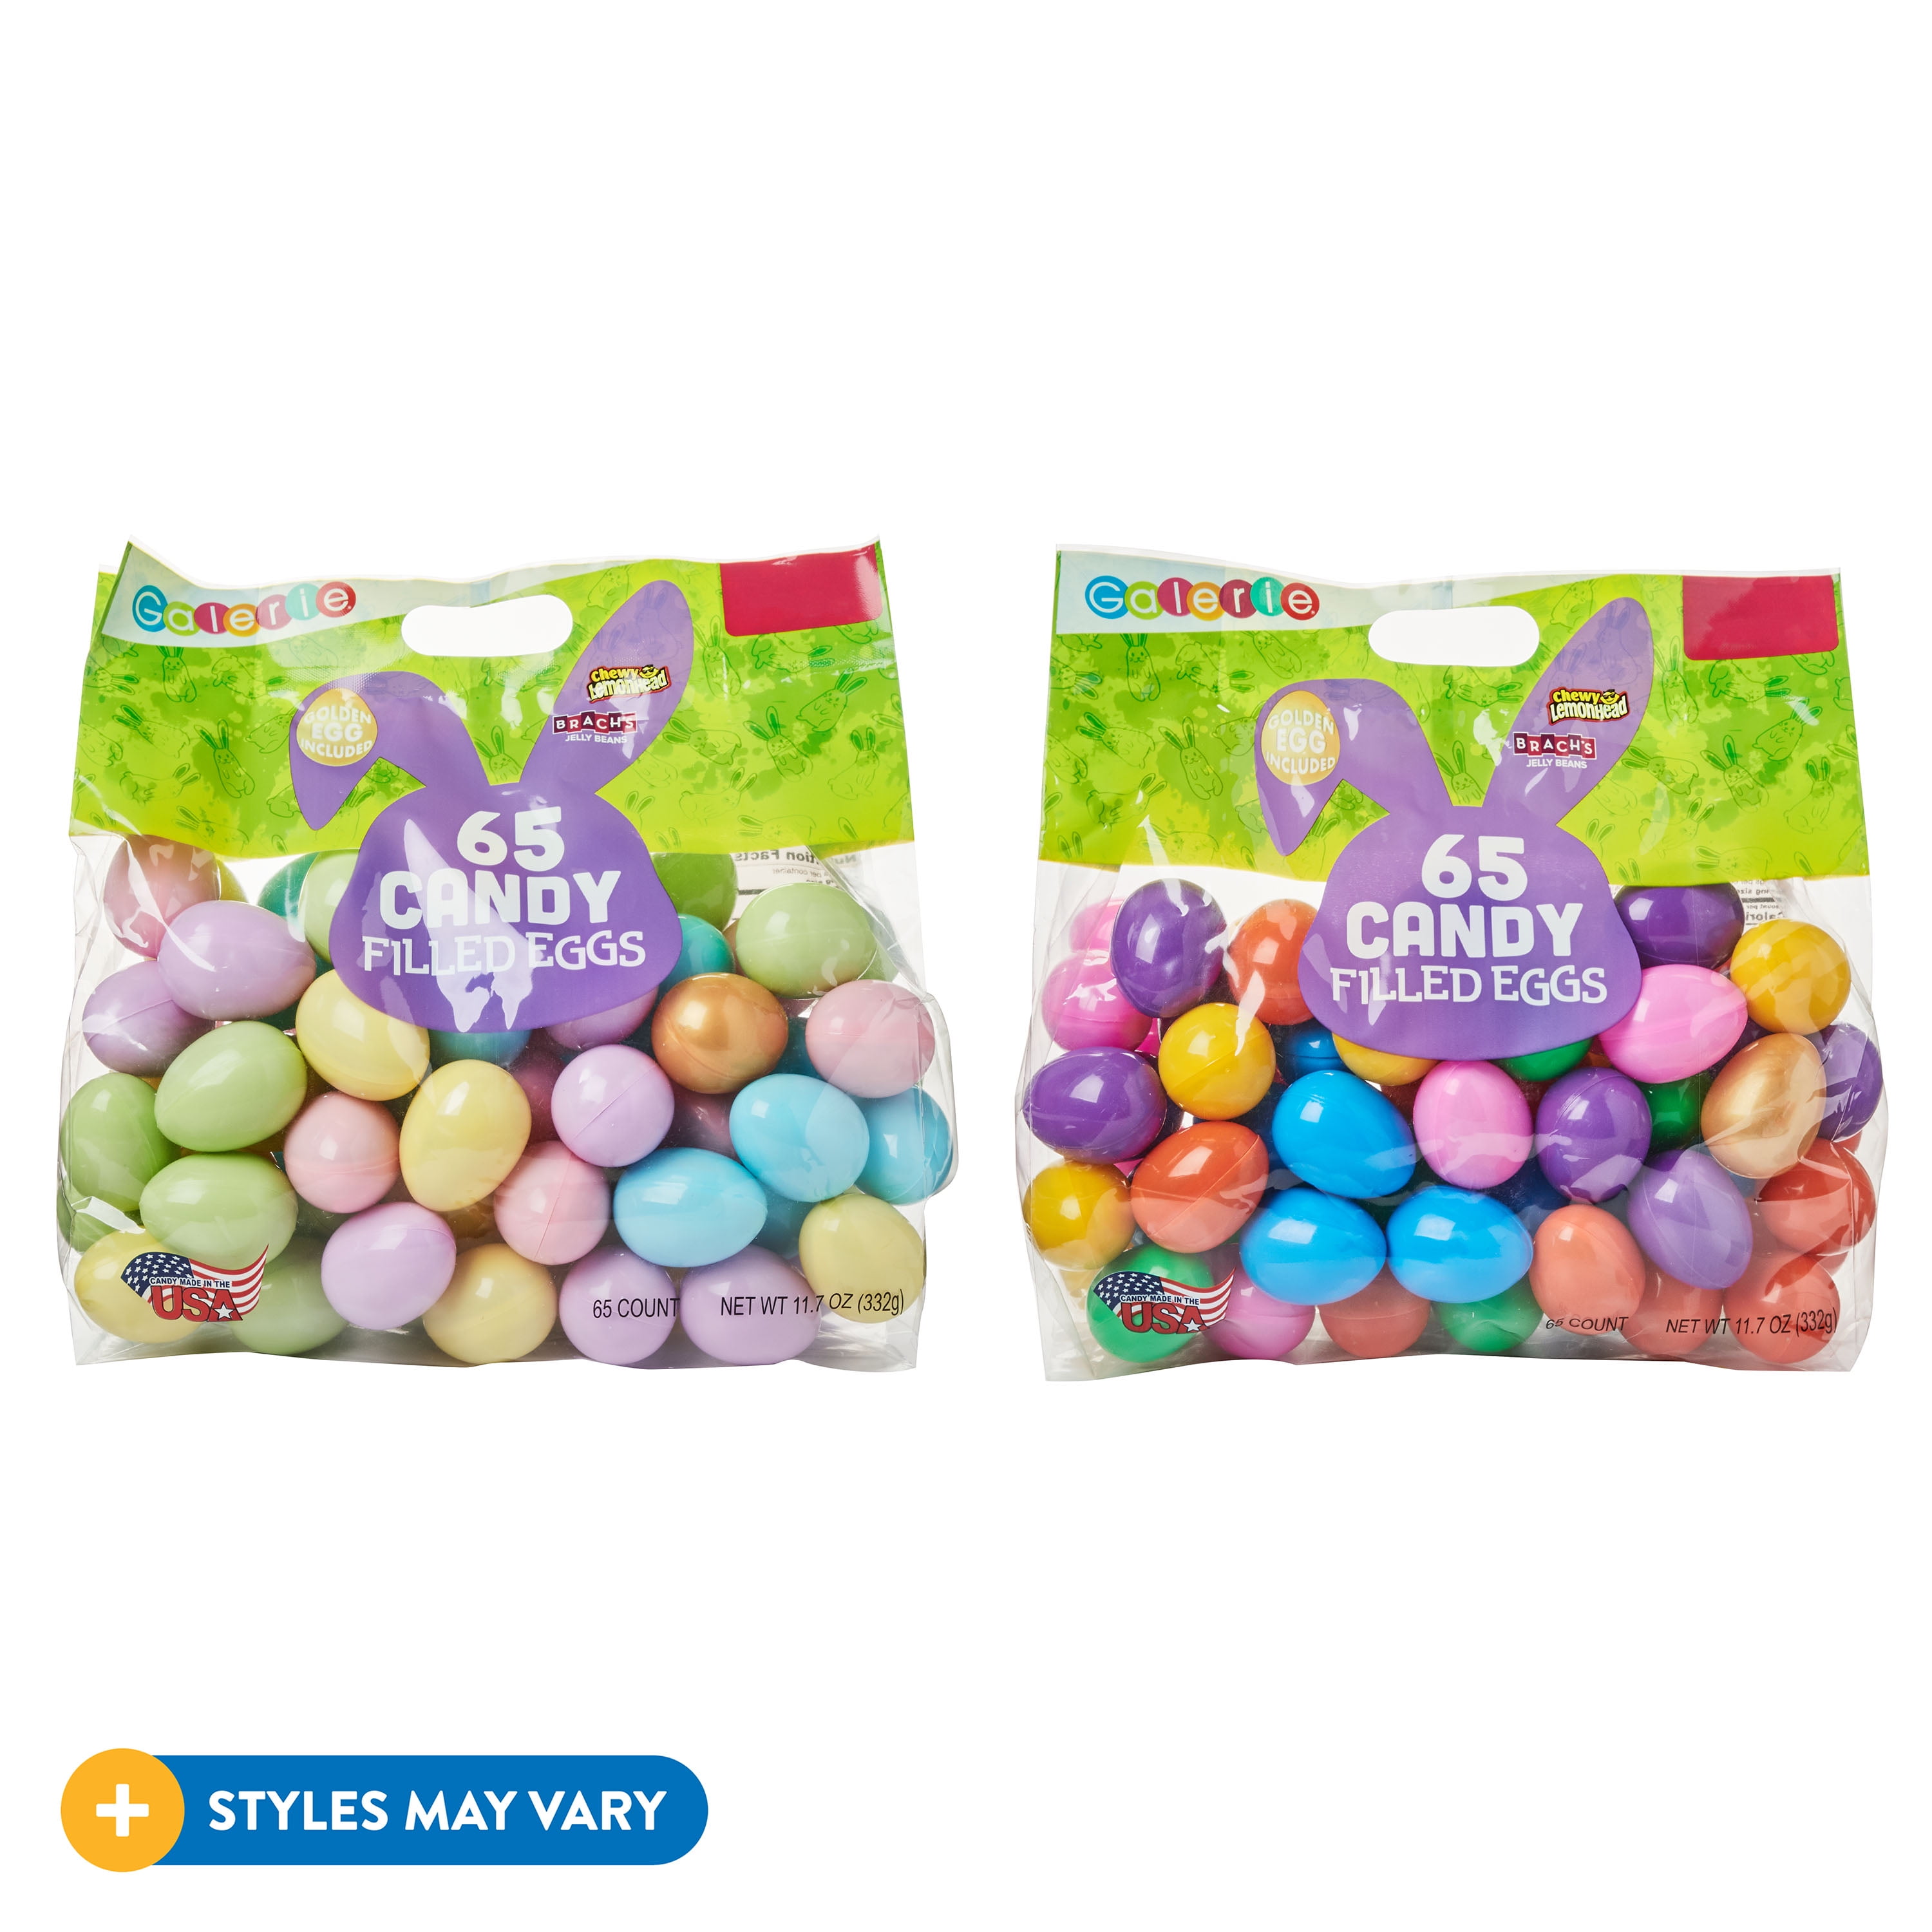 Walmart Easter Eggs Jelly Beans Gift Card No $ Value Collectible FD-40035 